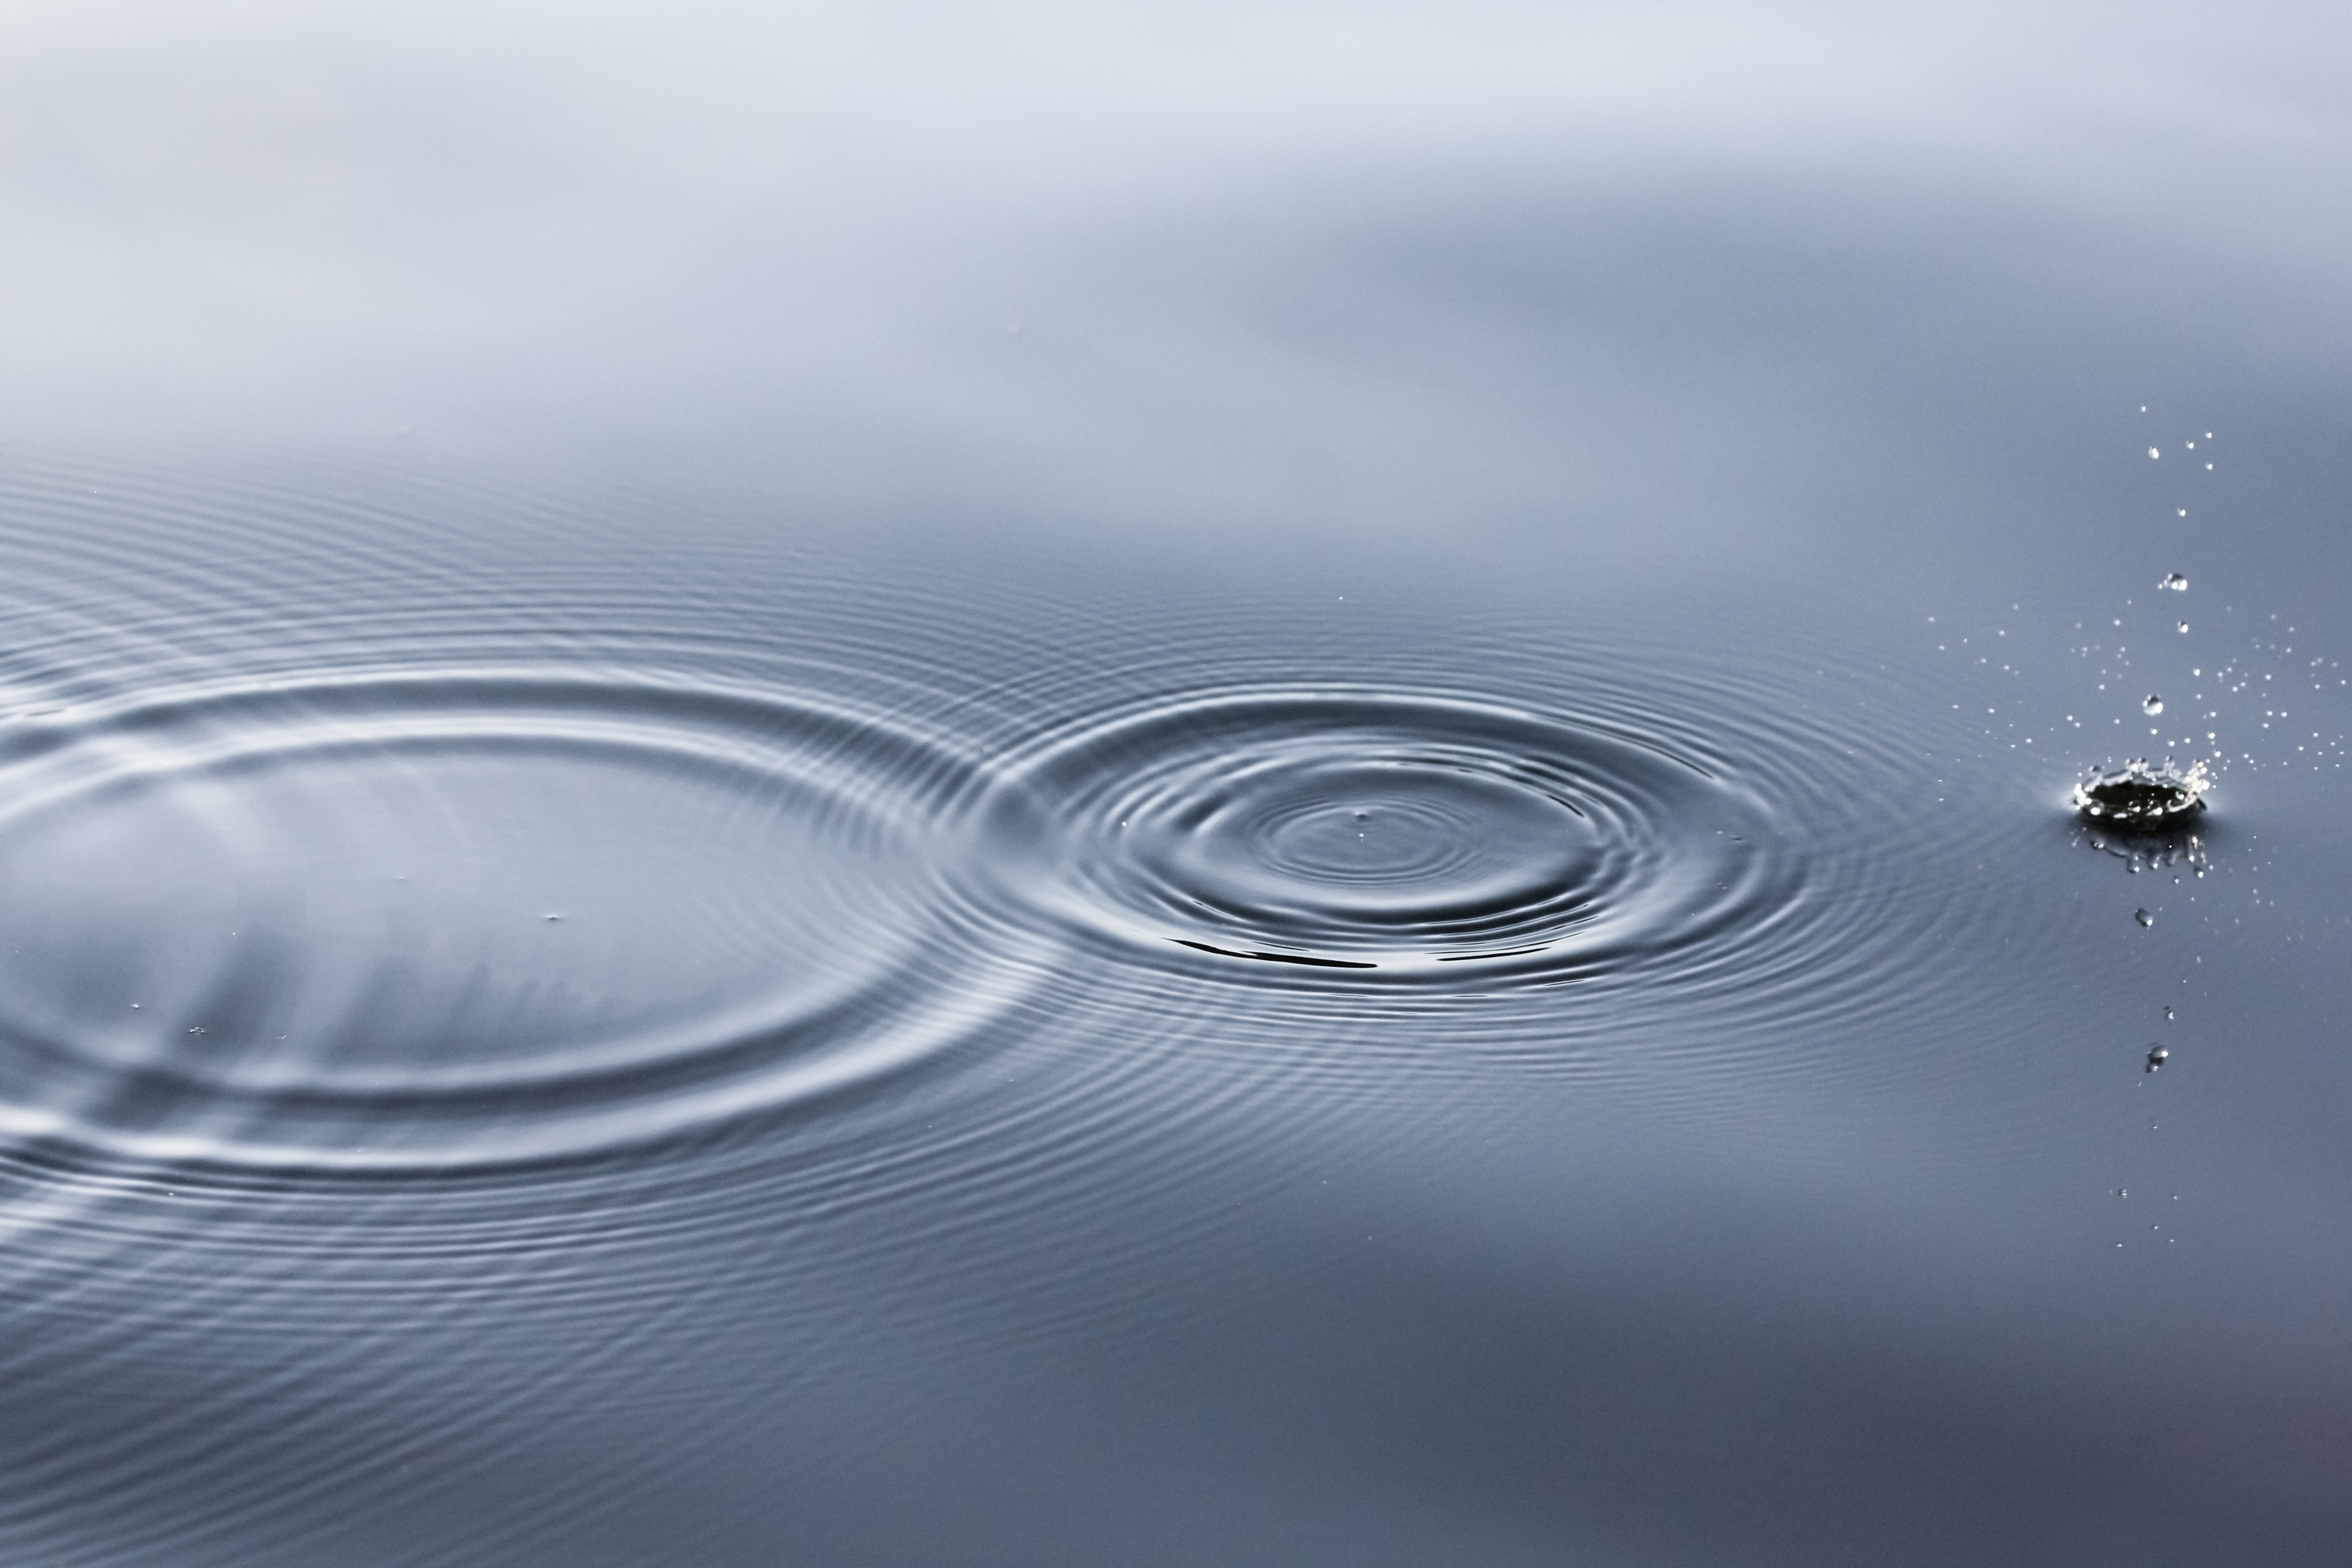 ripple effect on a water surface